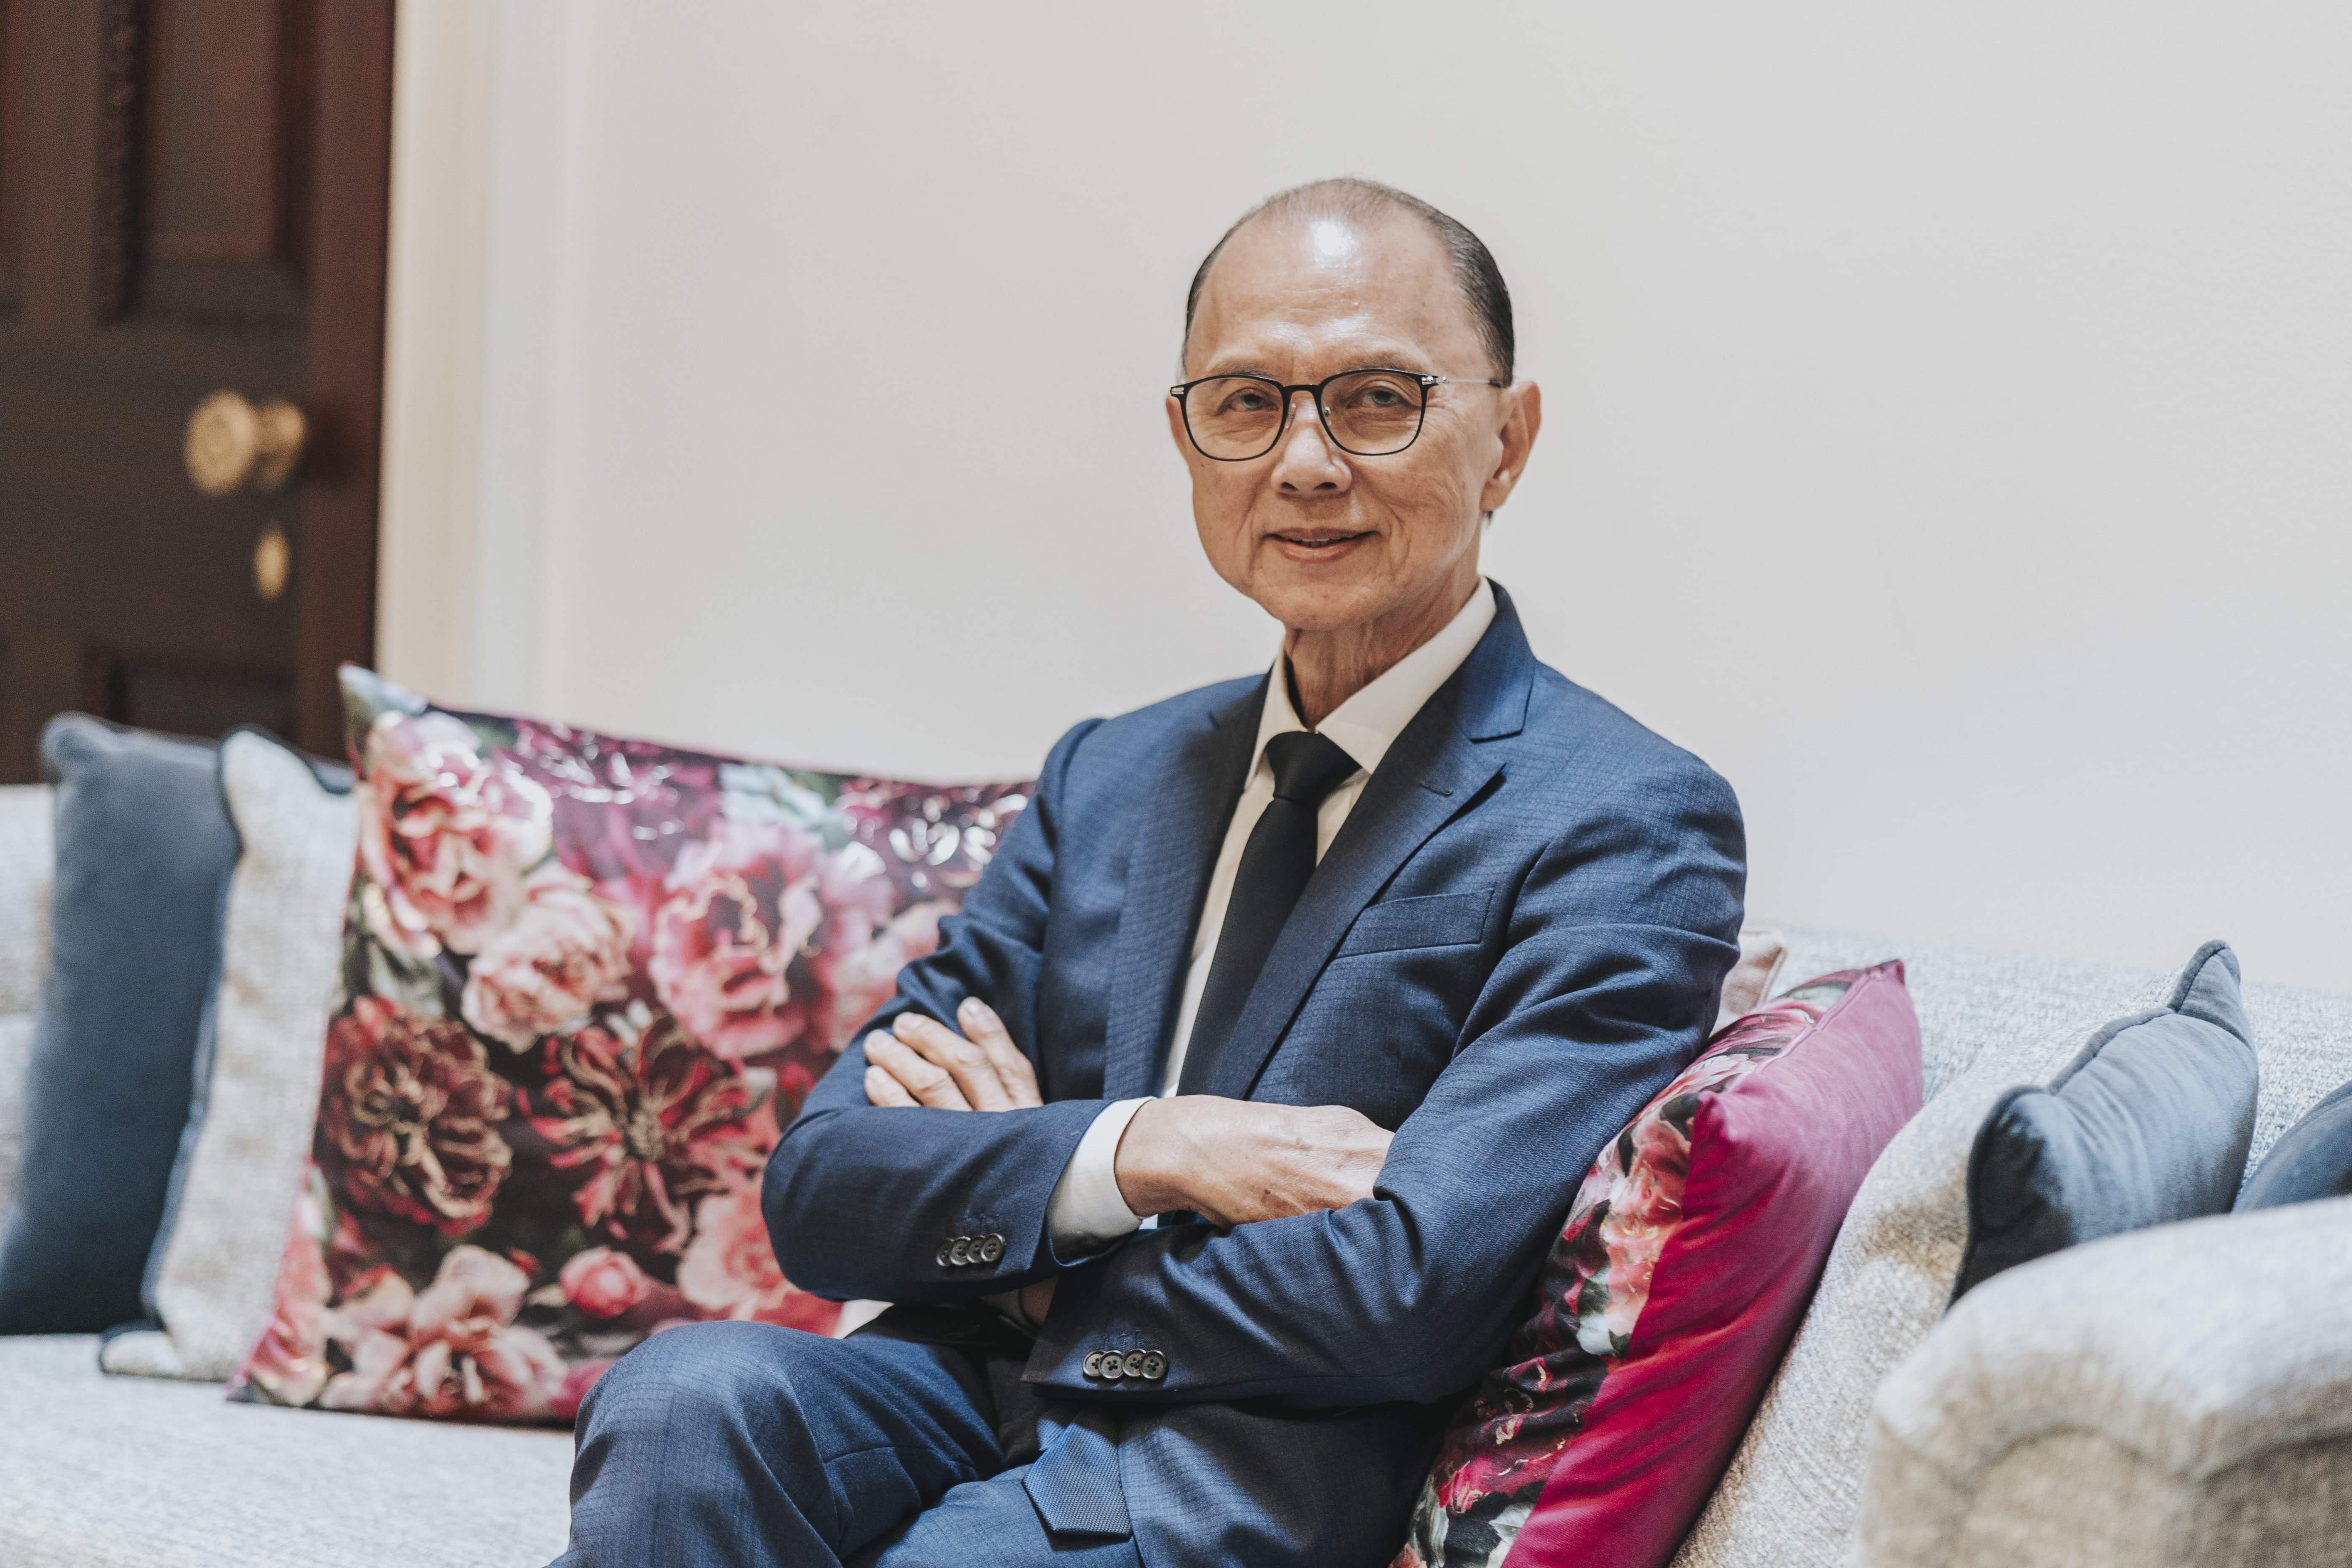 Jimmy Choo photographed in 2021